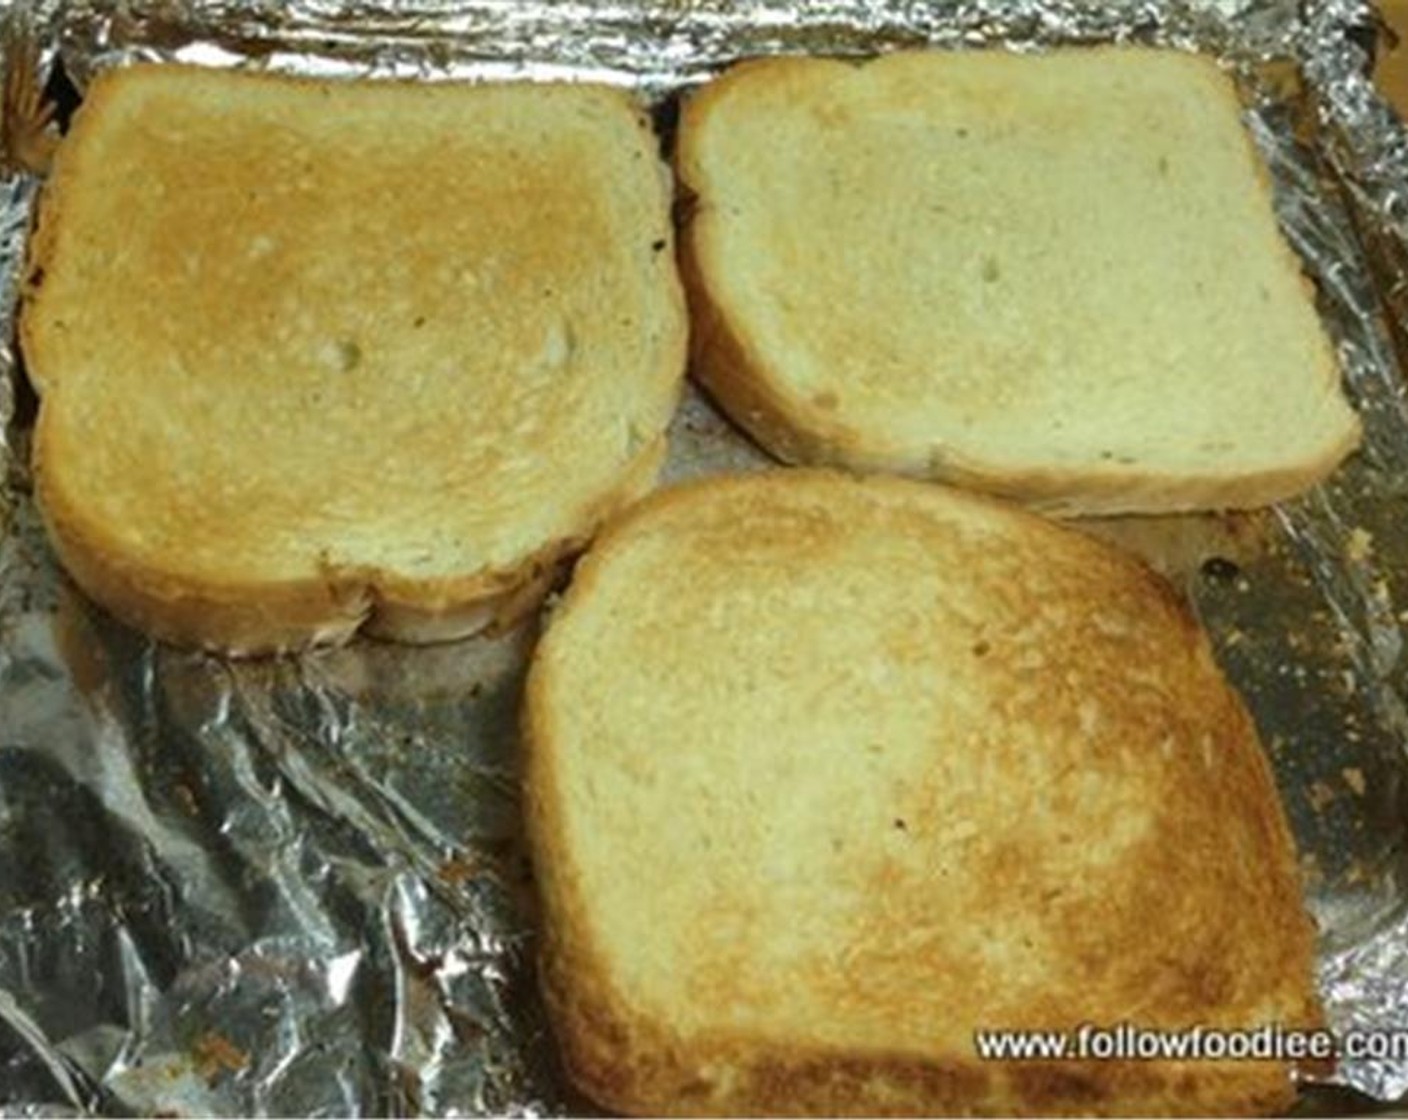 step 2 Place the Bread (3 slices) on a baking tray and toast the bread for few minutes, until brown in color.